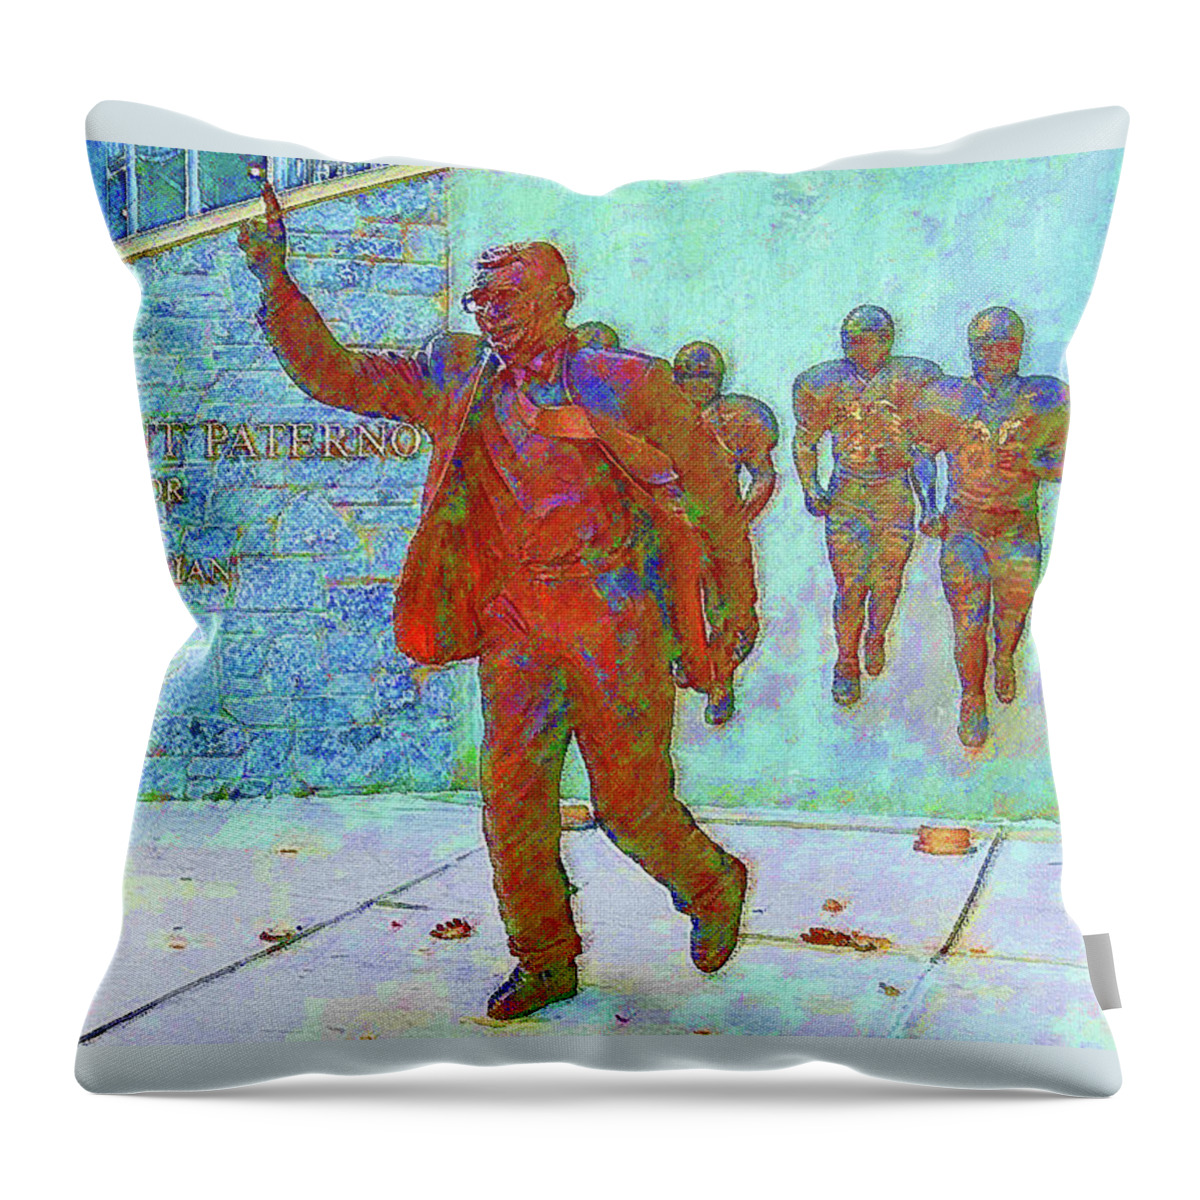 Coach Joe Paterno Throw Pillow featuring the mixed media We're #1 Penn State by DJ Fessenden